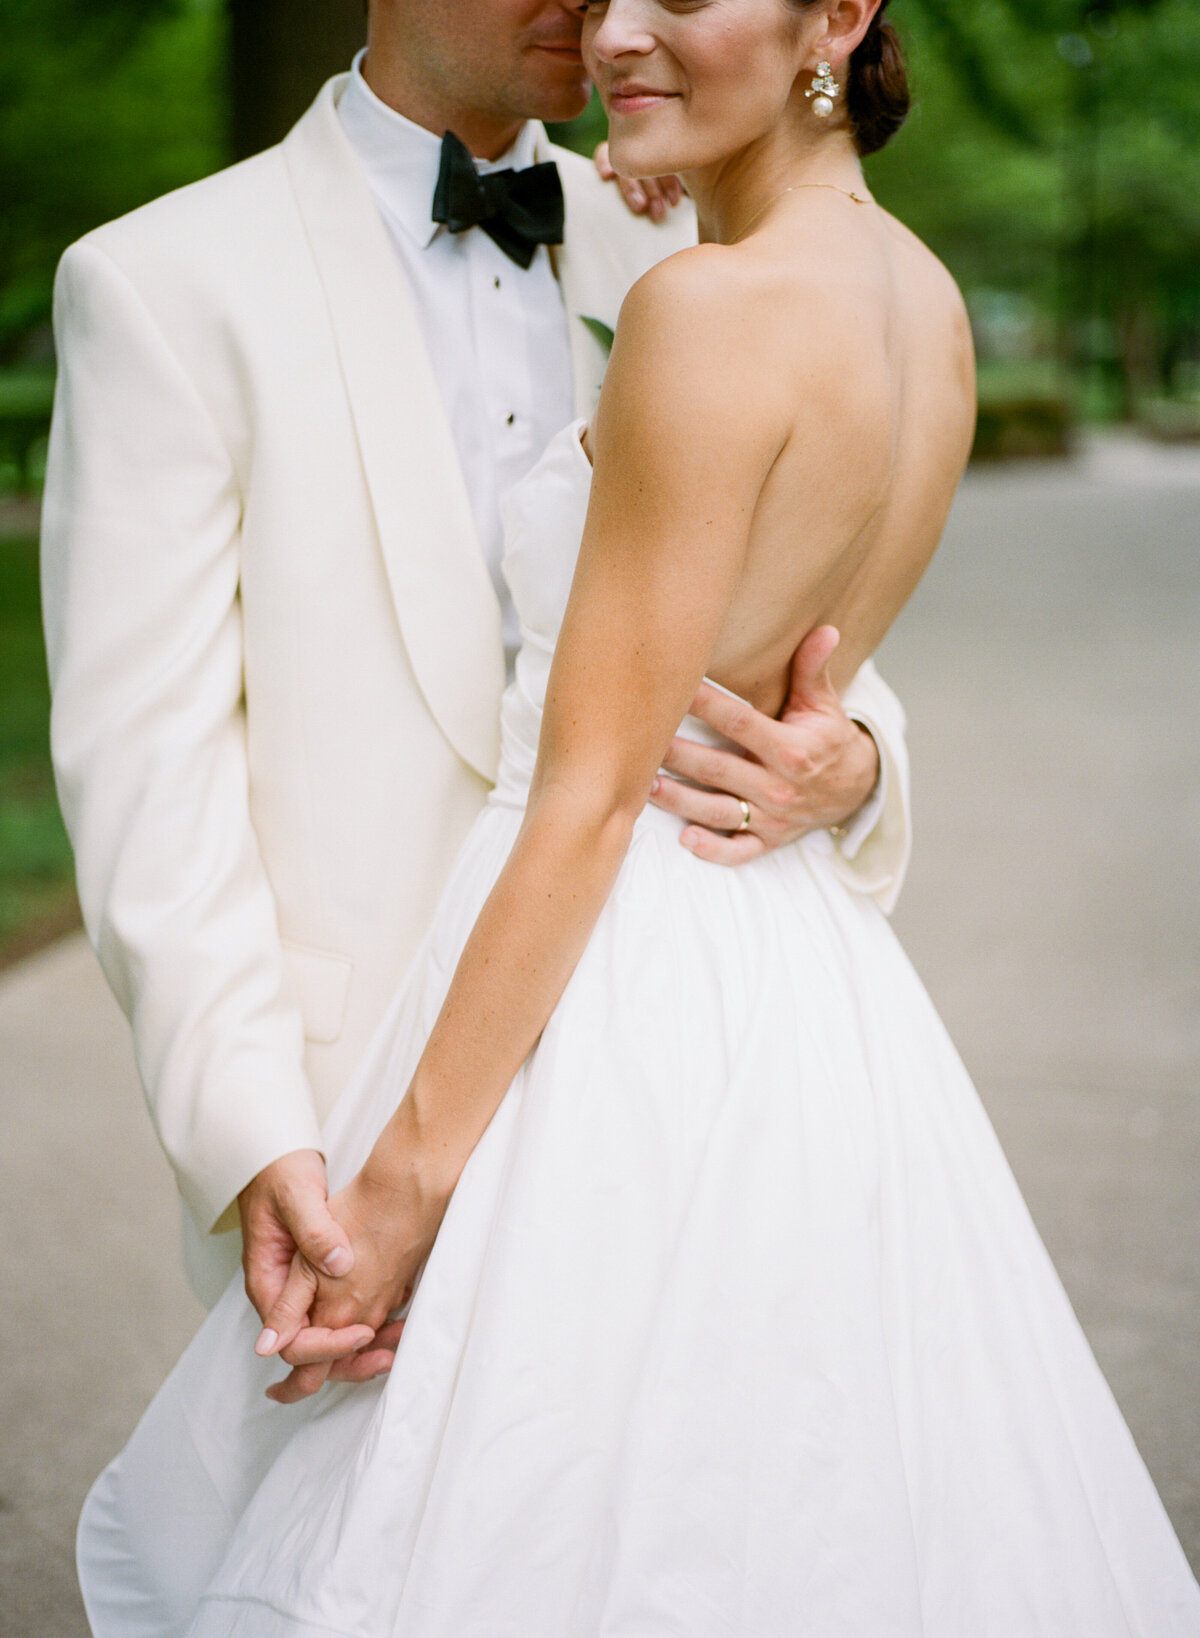 image of bride and groom holding hands outdoors